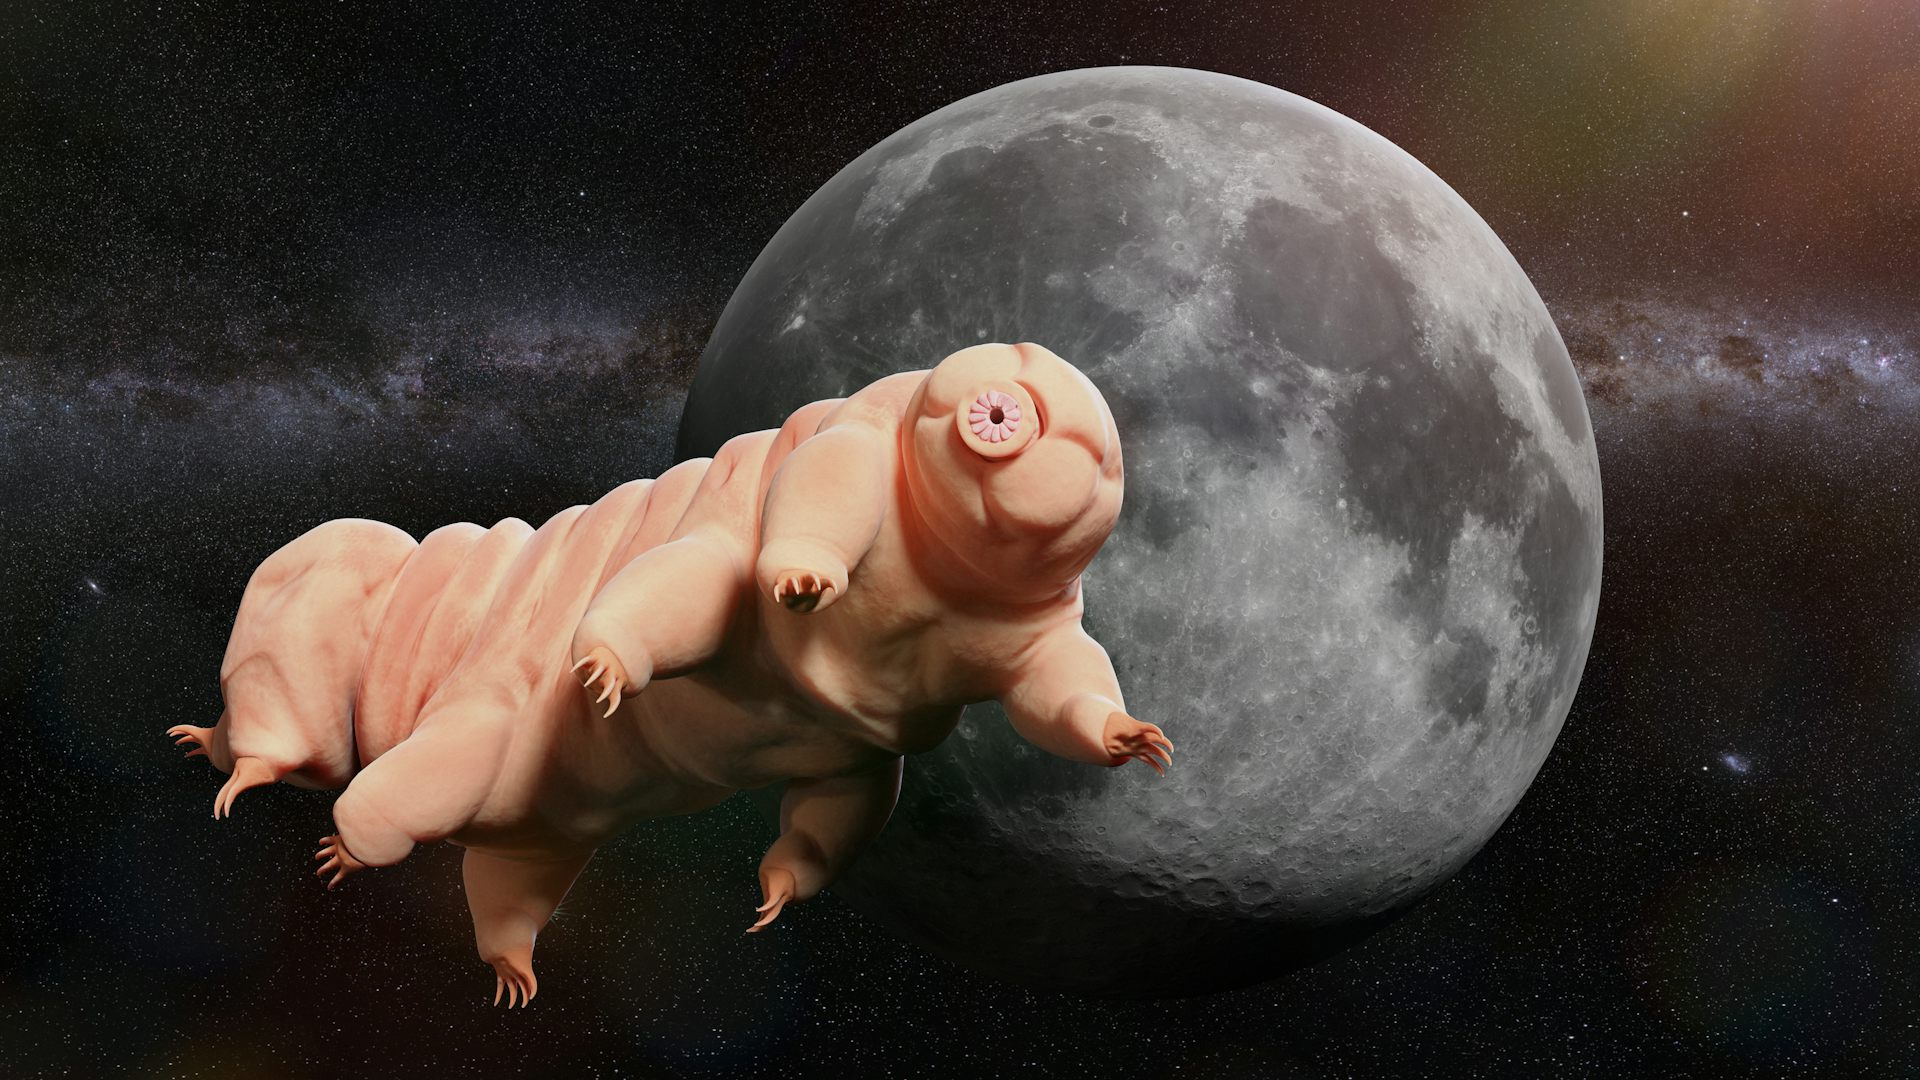 Could tardigrades have colonized the moon? Space